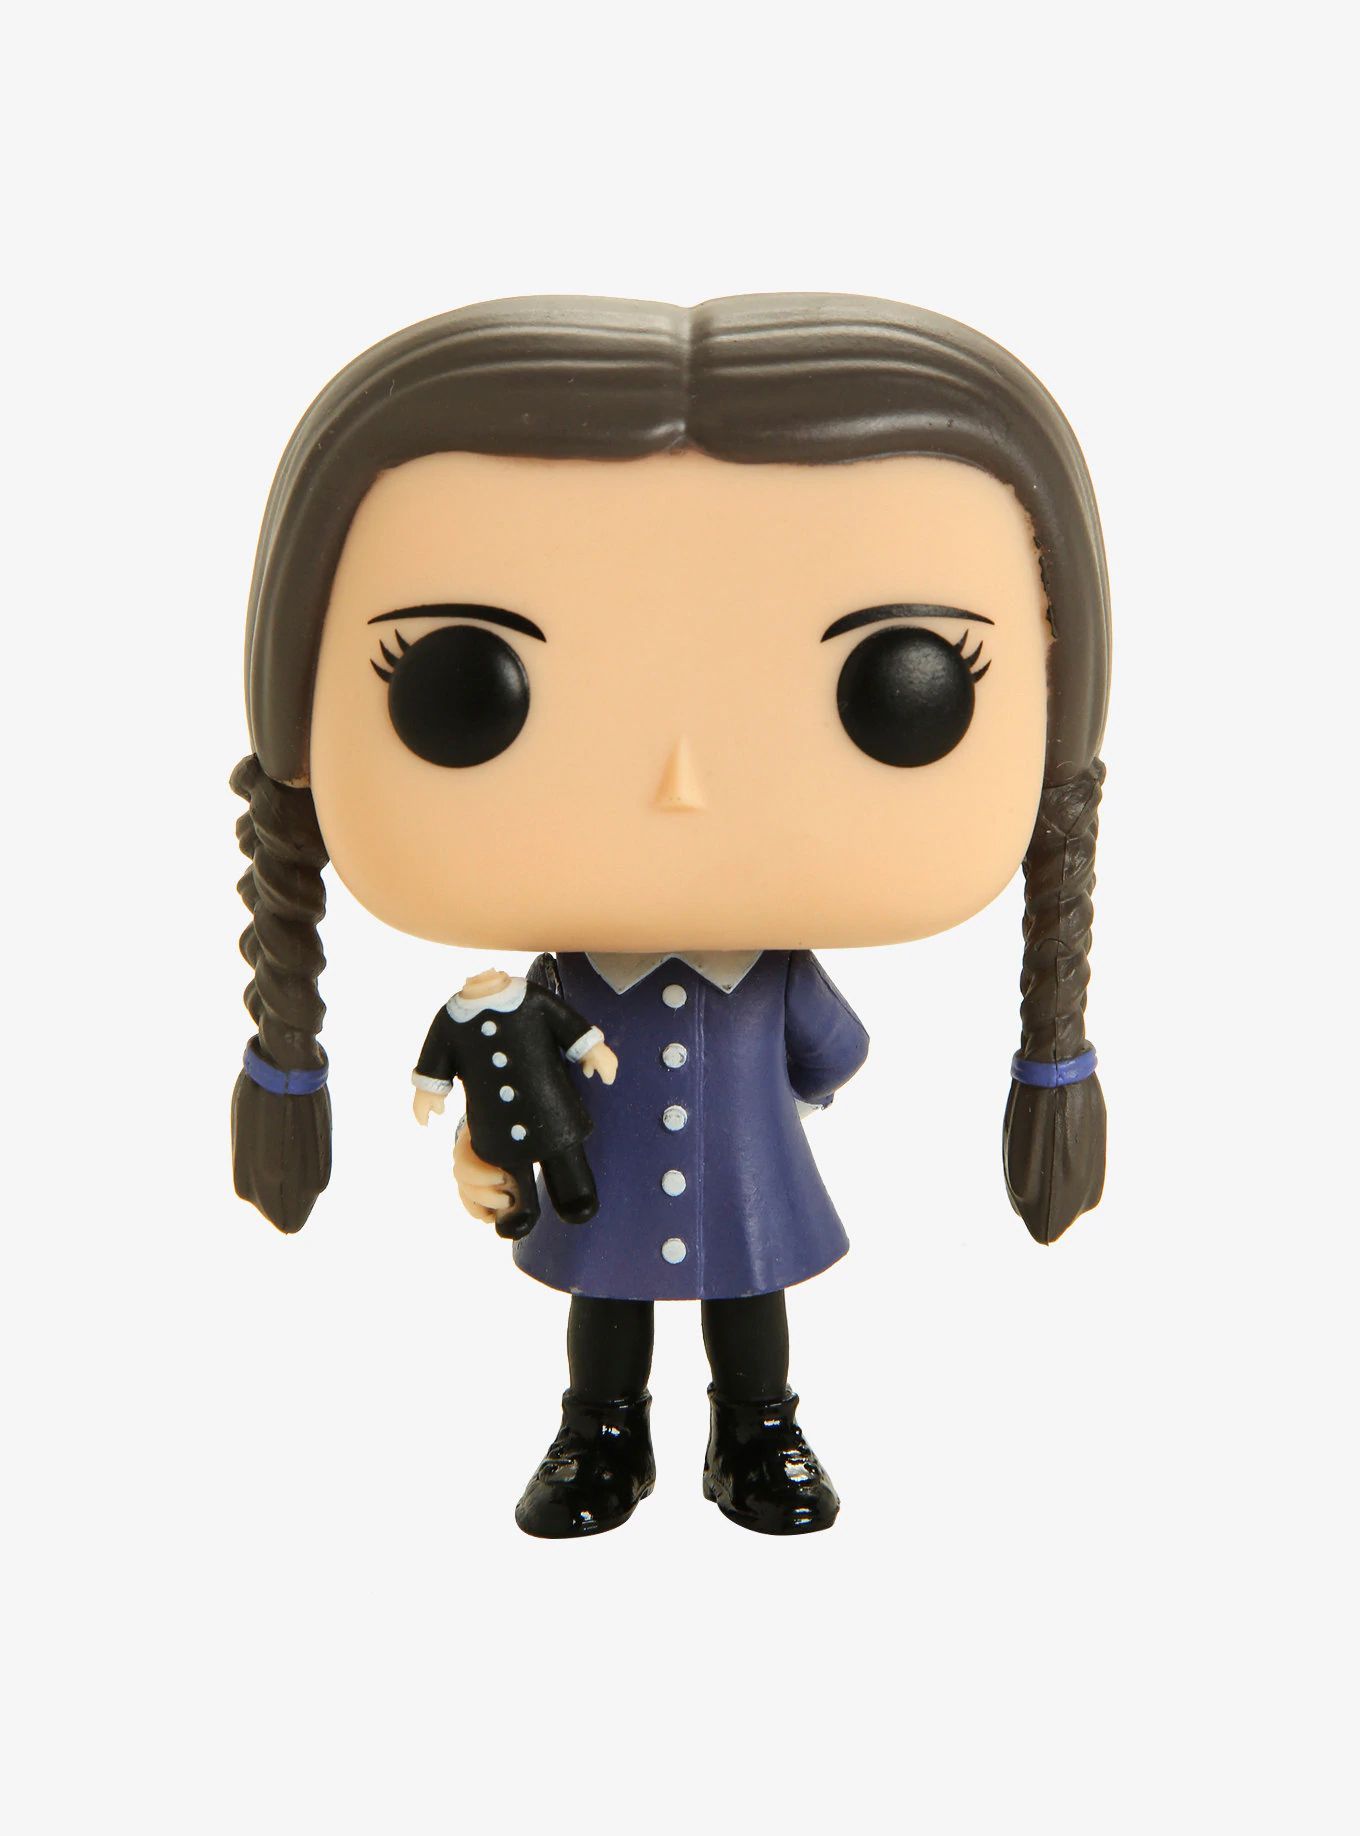 Wednesday (Wandinha) #811 - The Addams Family (A Família Addams) - Funko Pop! Television